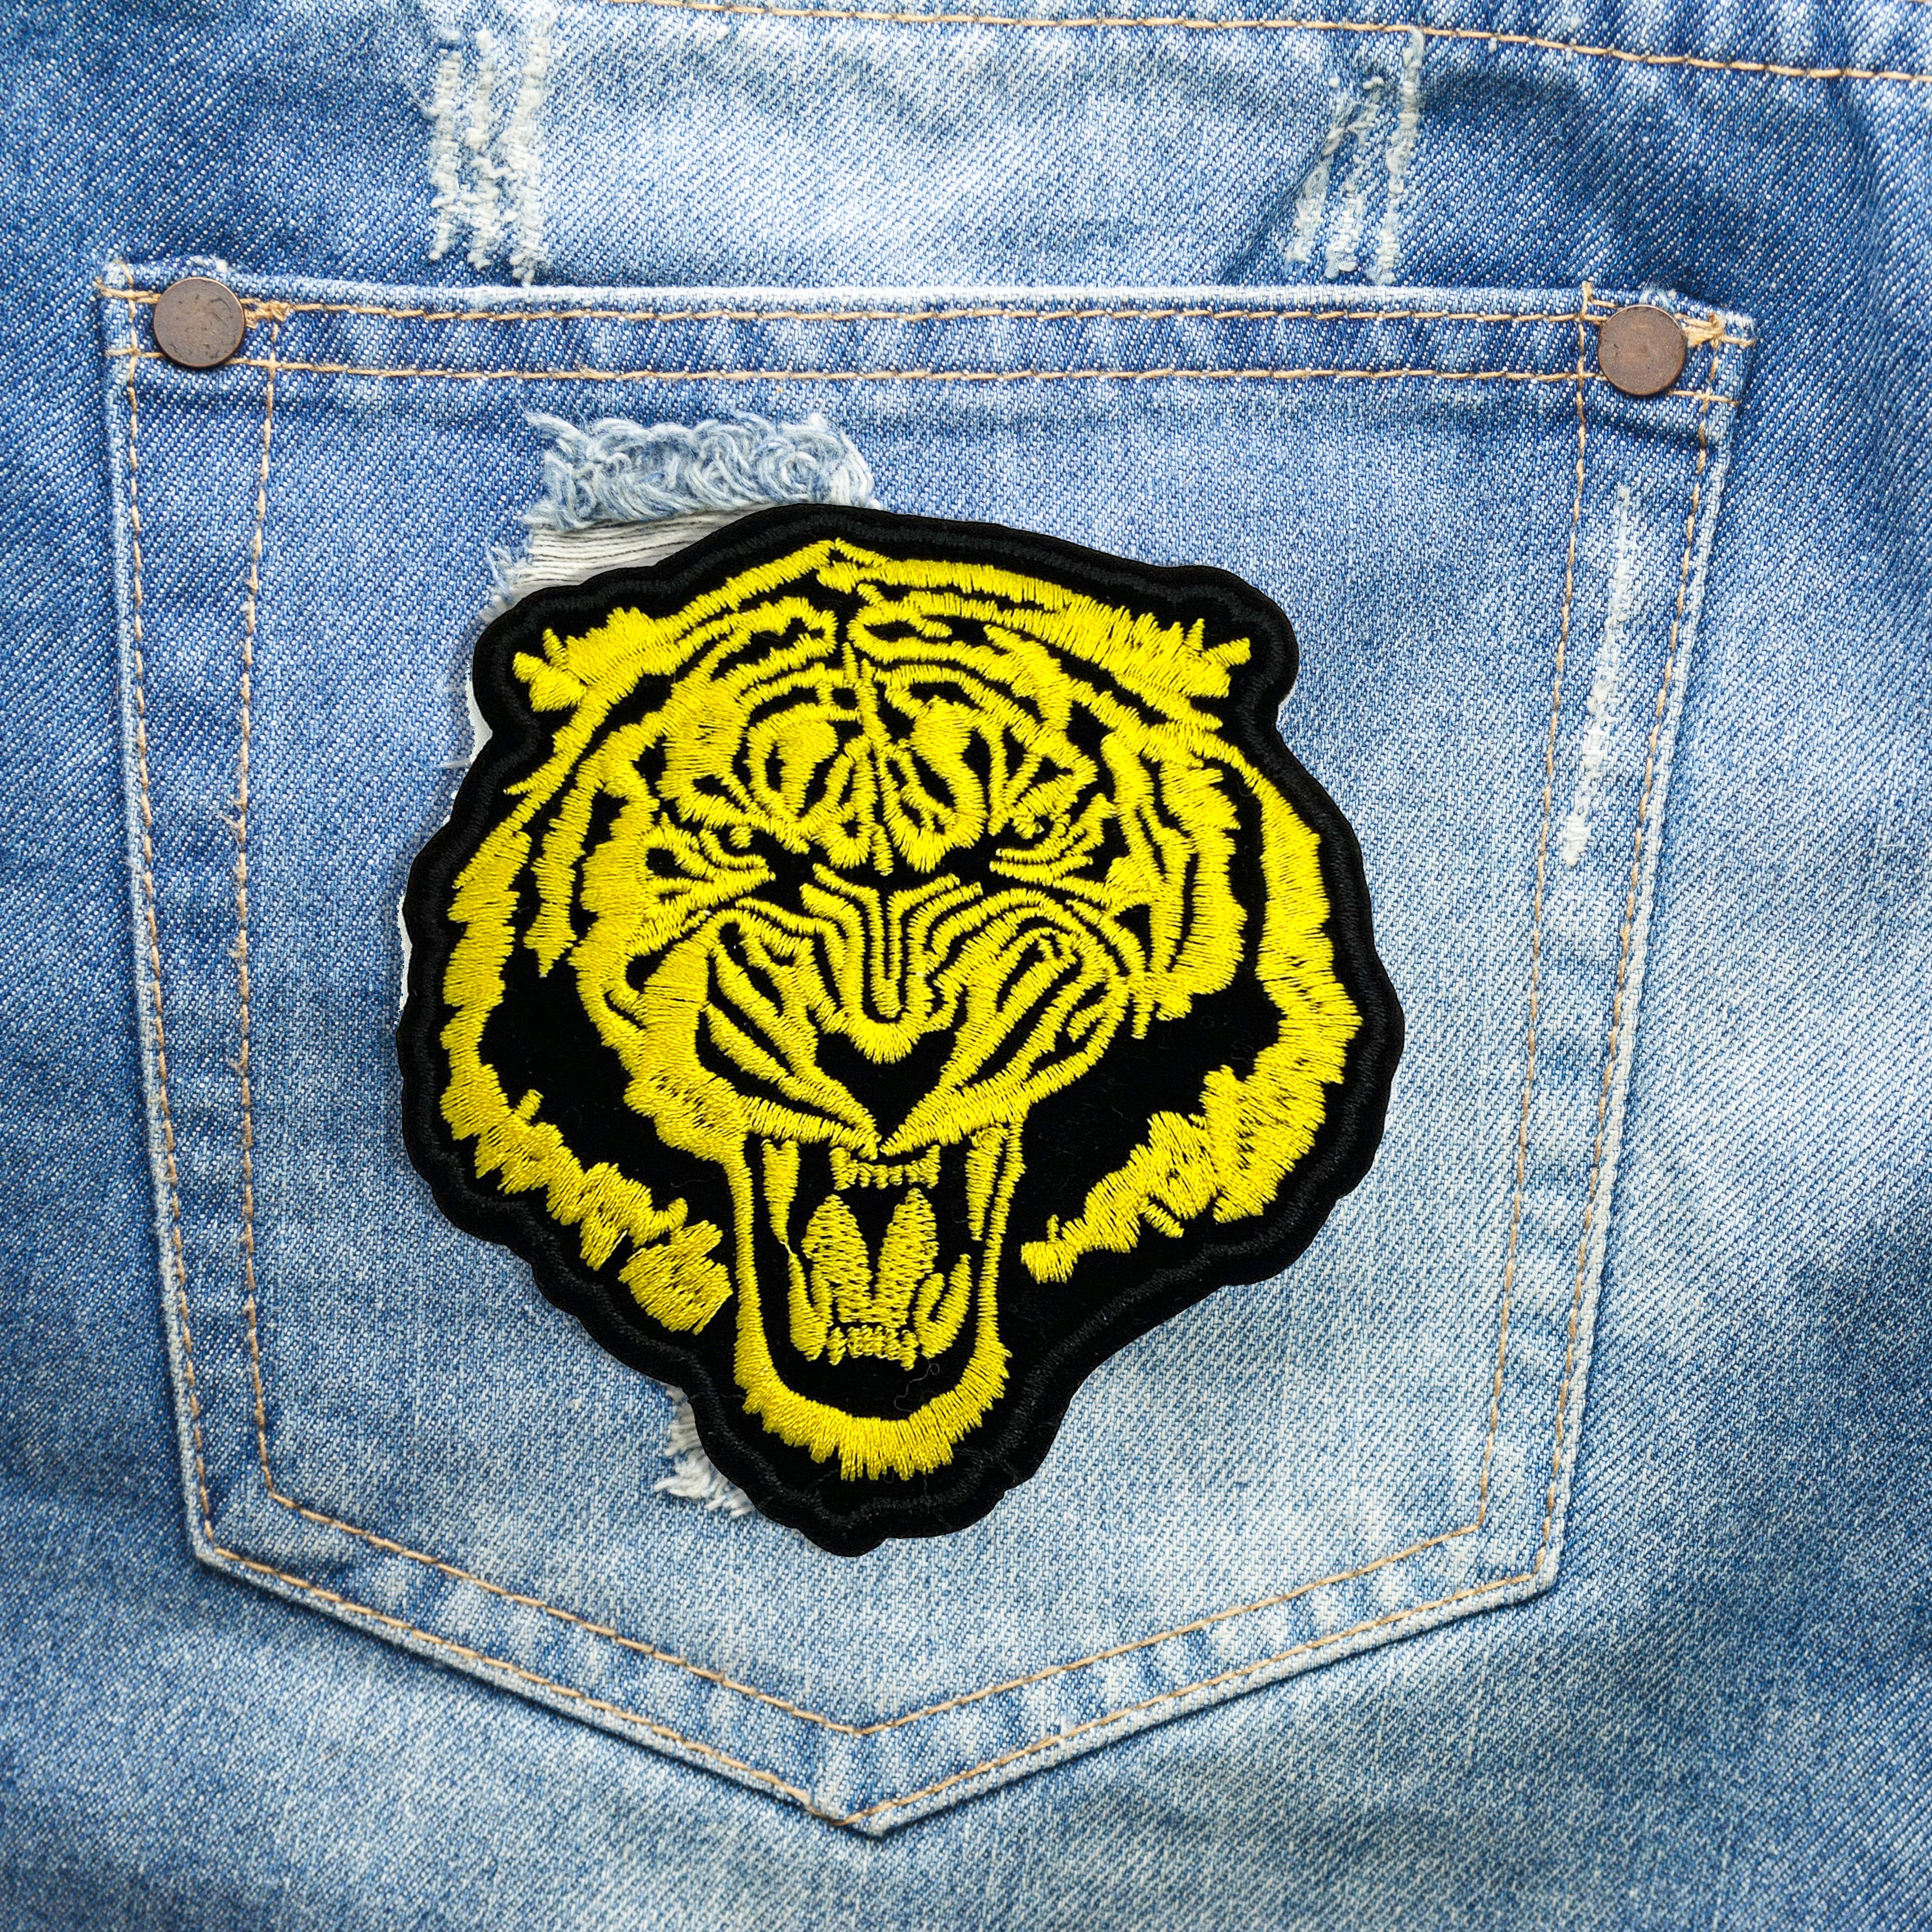 Gwen Studios Black and Yellow Fighting Tiger Embroidered Iron-On Patch  Applique, 4 x 3.75 